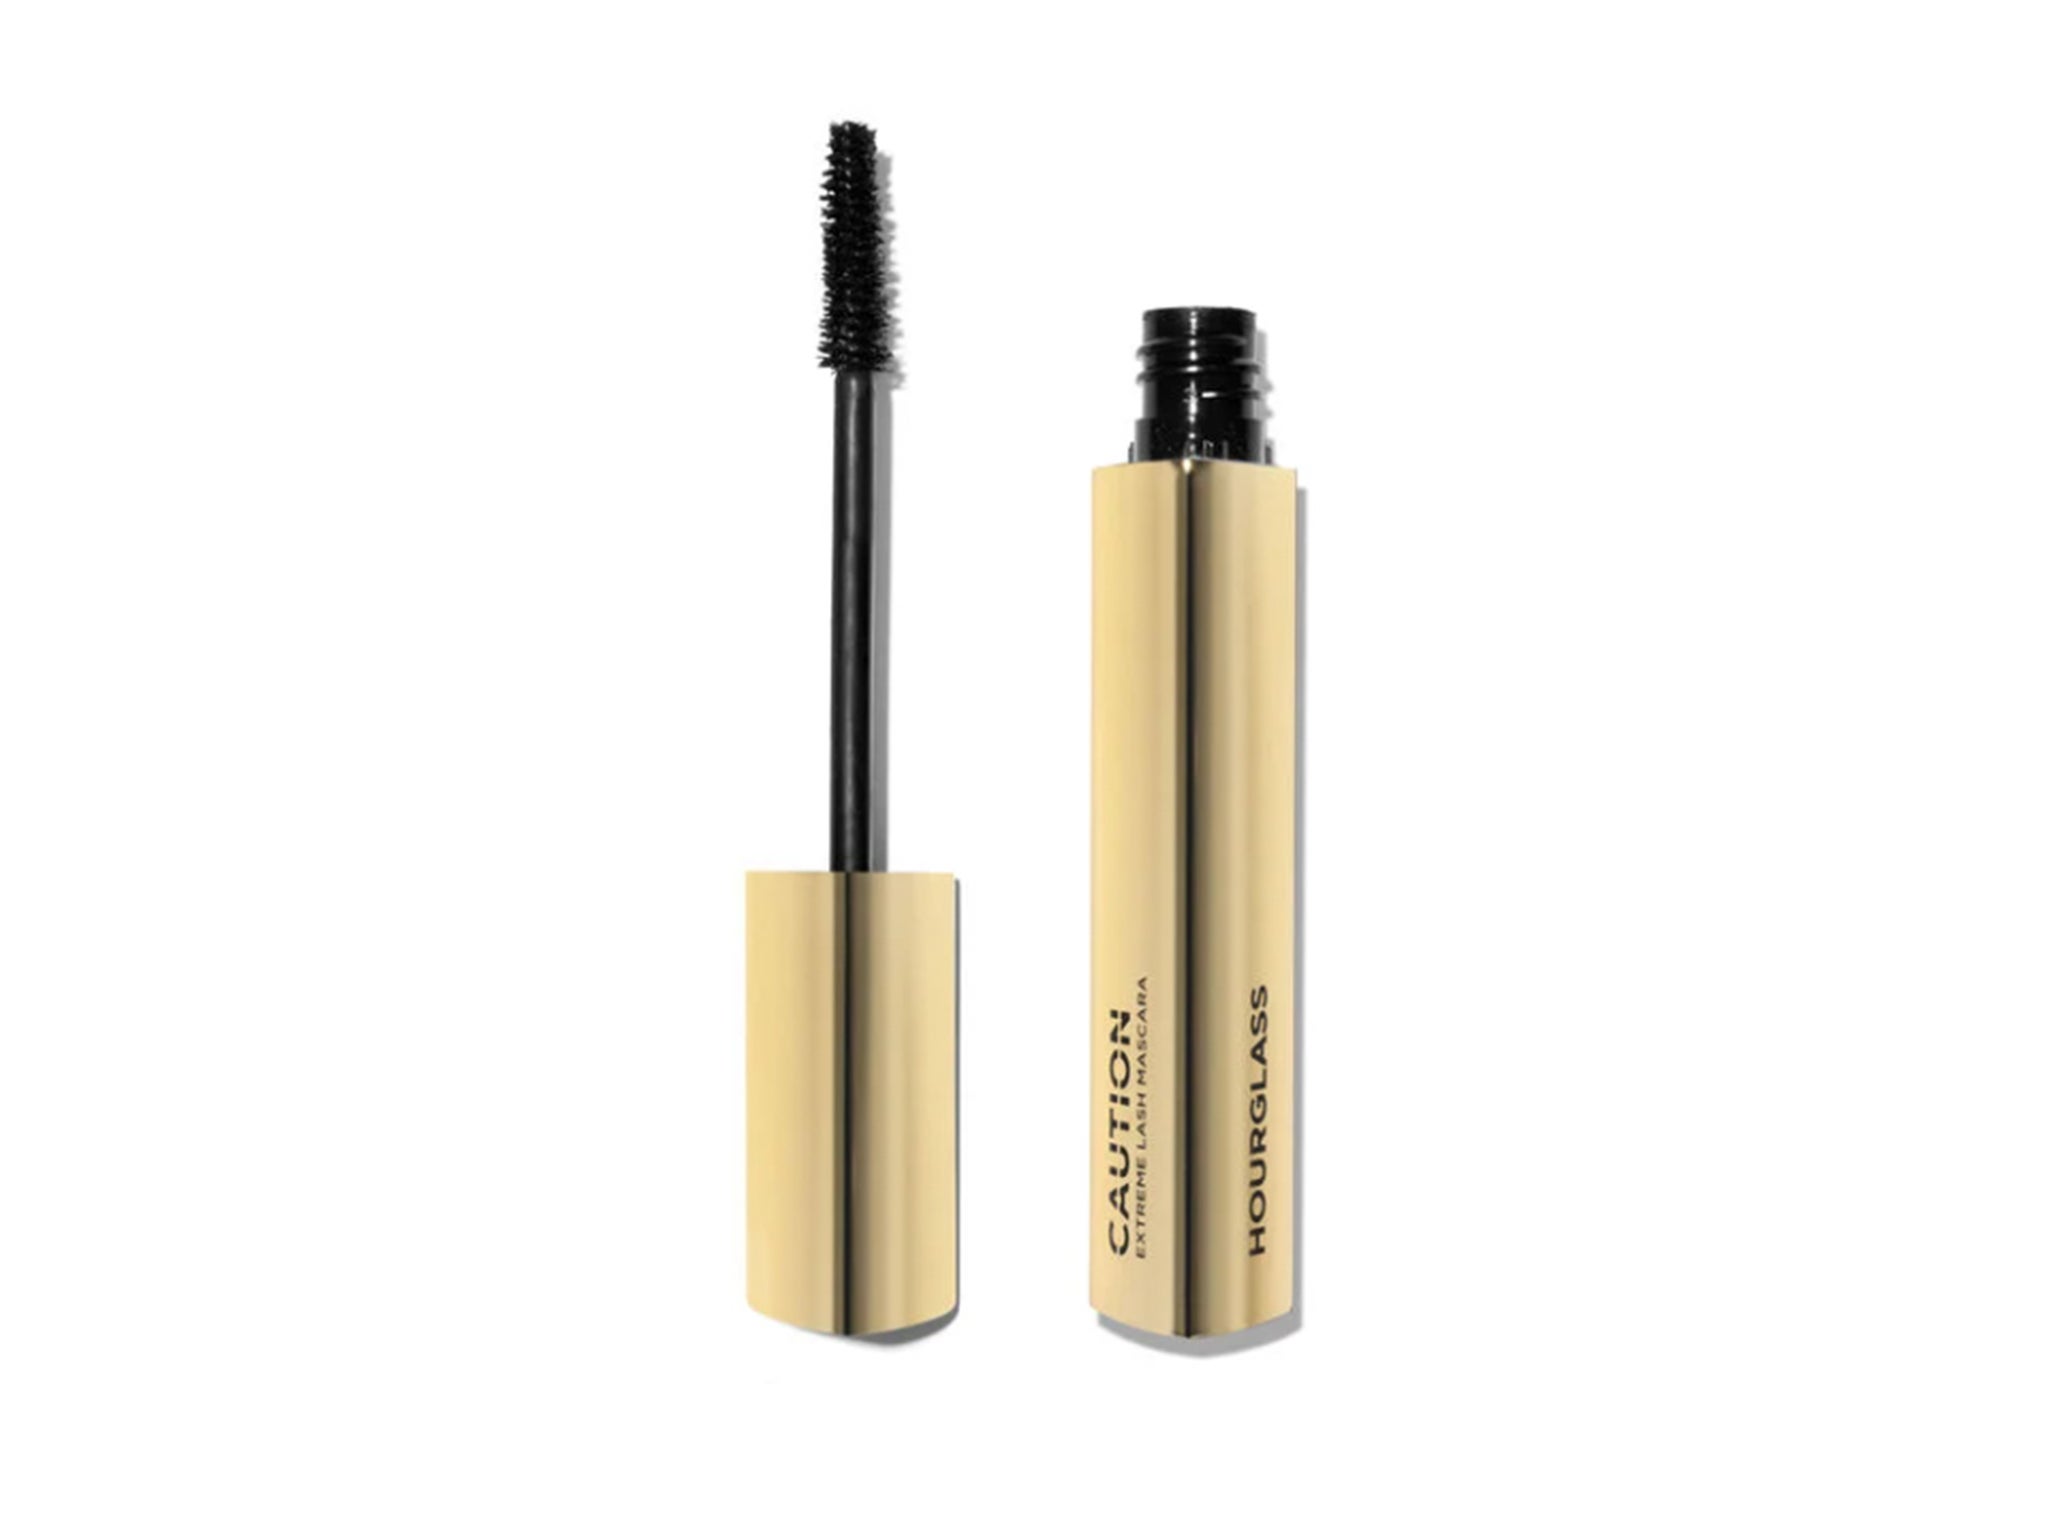 Space NK Hourglass caution extreme lash mascara